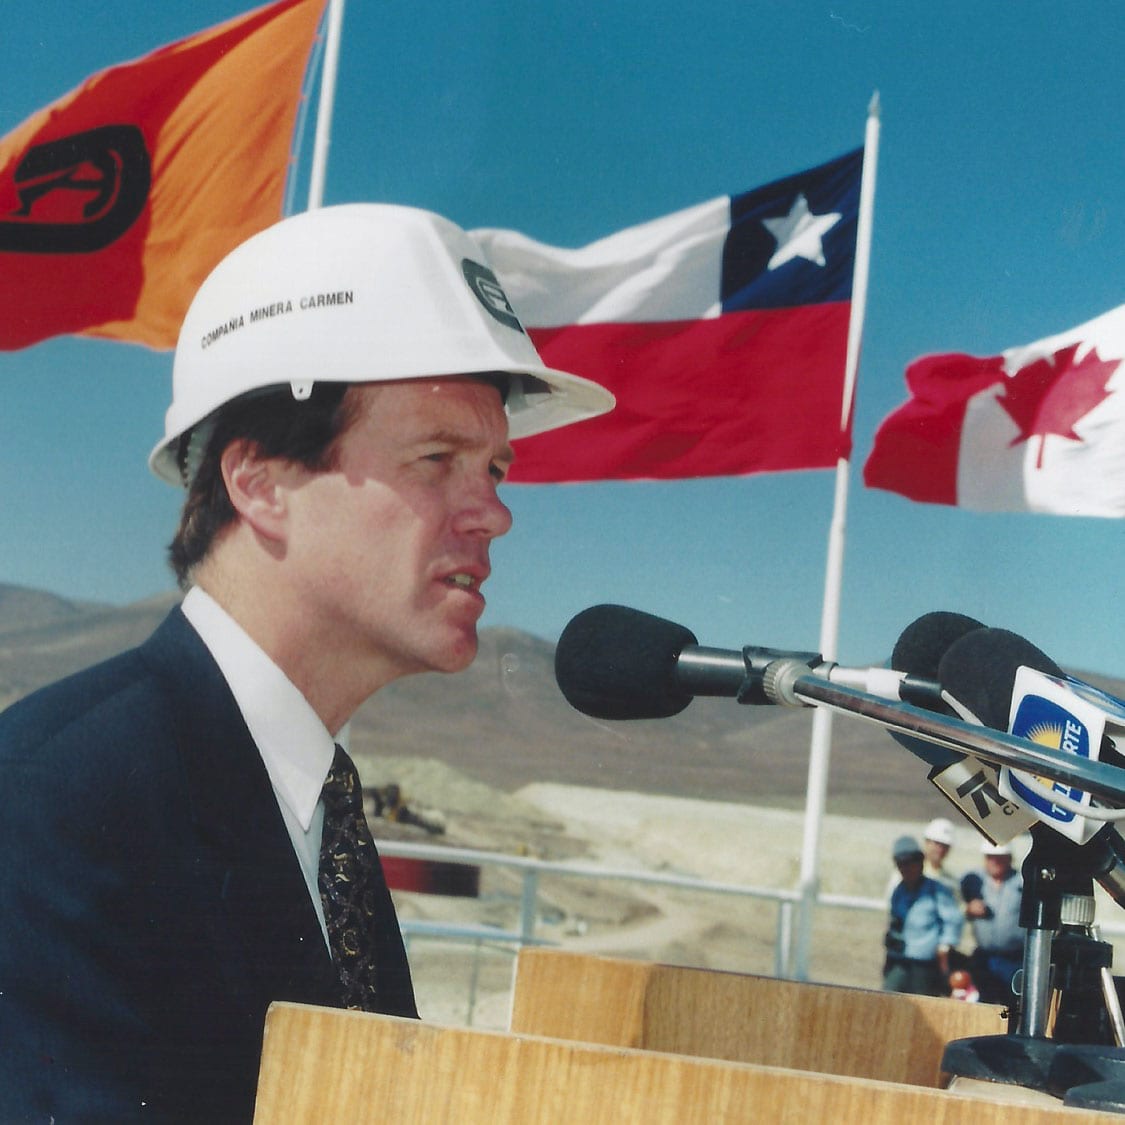 David Brace wears a hard hat and speaks into a microphone. Behind him are the flags of Chile and Canada.